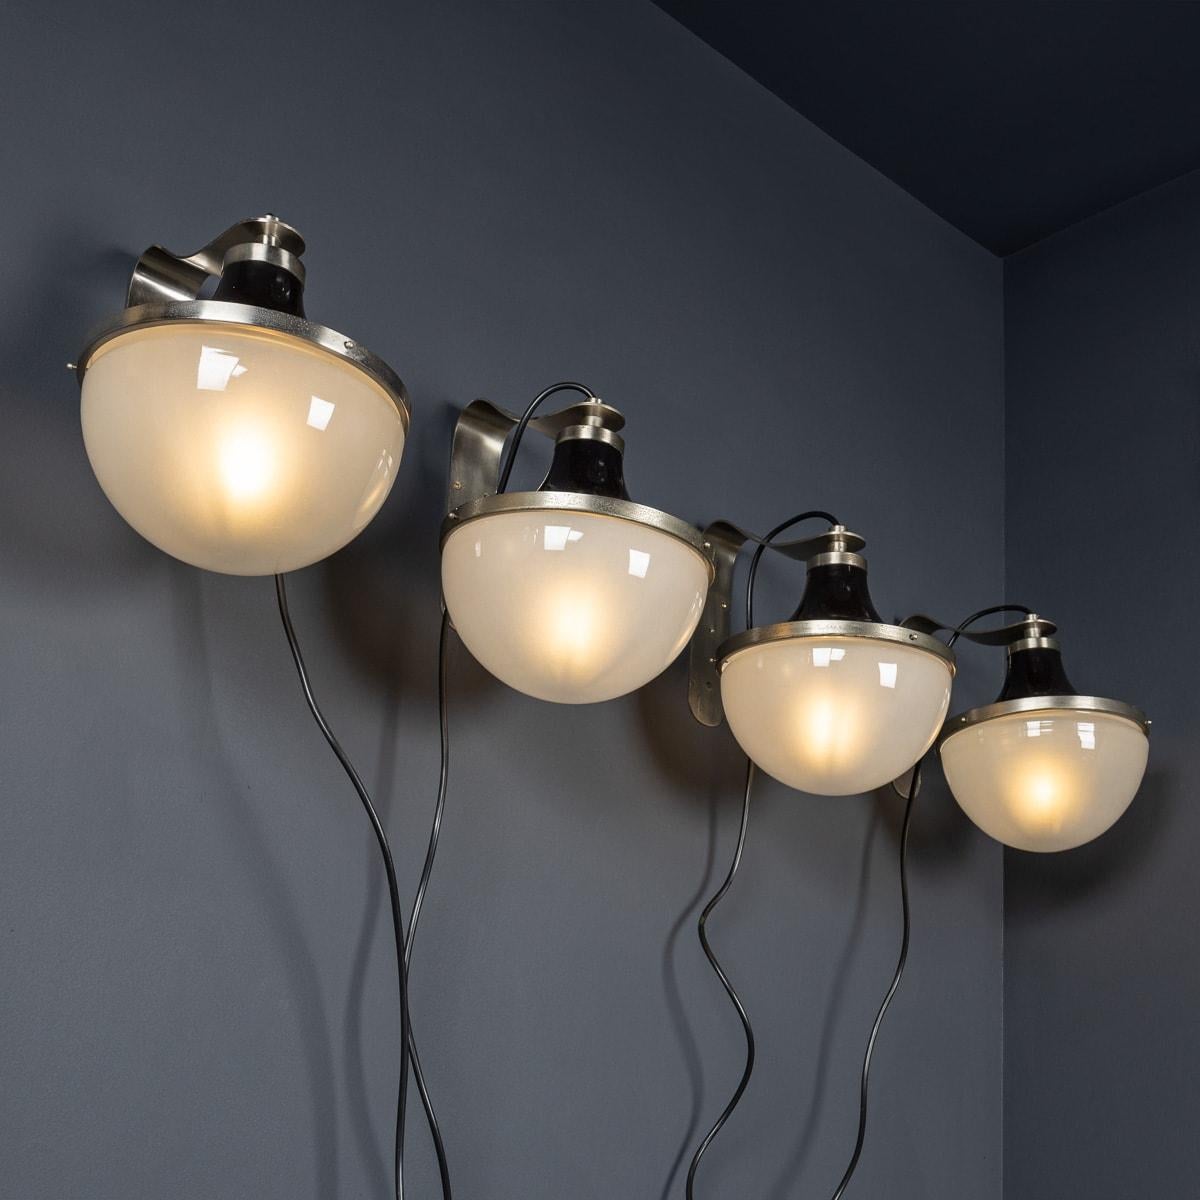 A superb set of four mid 20th Century Italian wall lights. These stylish lights showcase a blend of metal and black enamel complemented by white opaque glass shades, epitomising the essence of 1950's Italian design. Perfect for enhancing